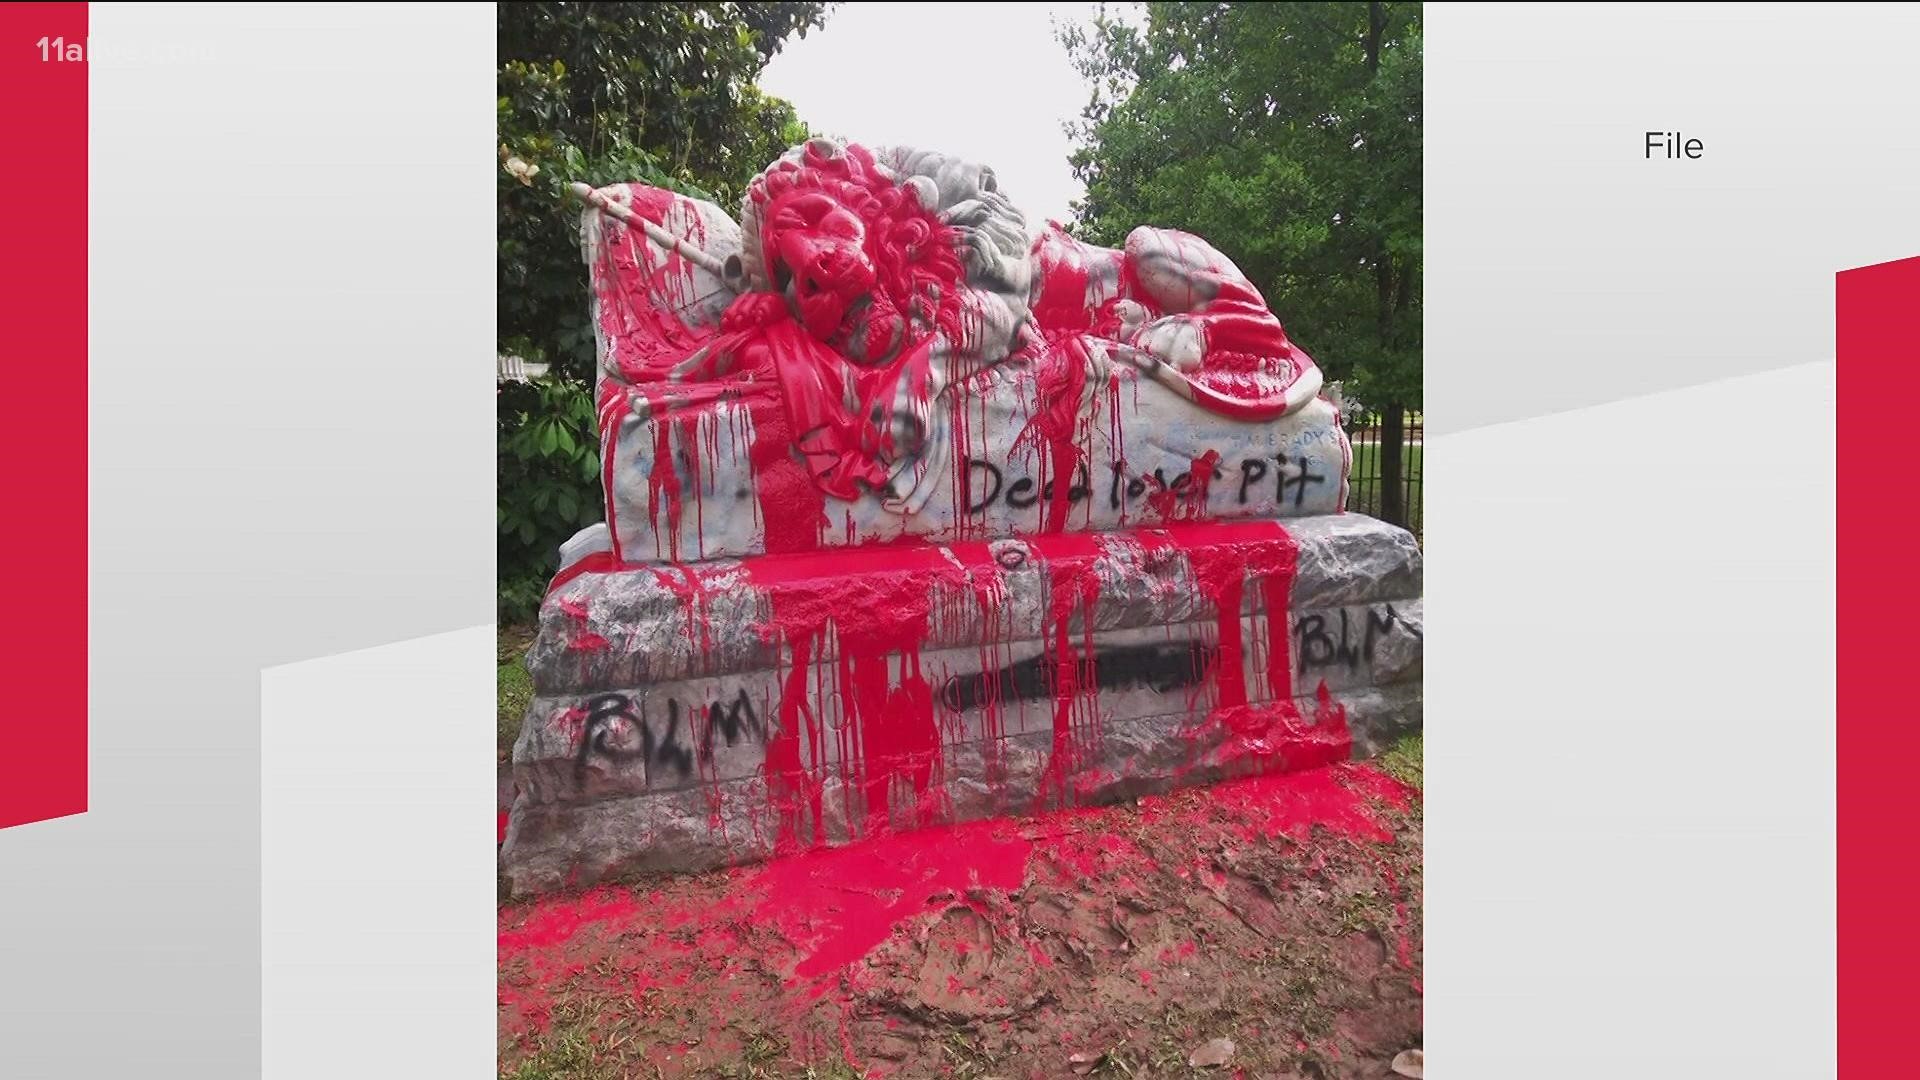 The Oakland Cemetery fixture has been repeatedly defaced.